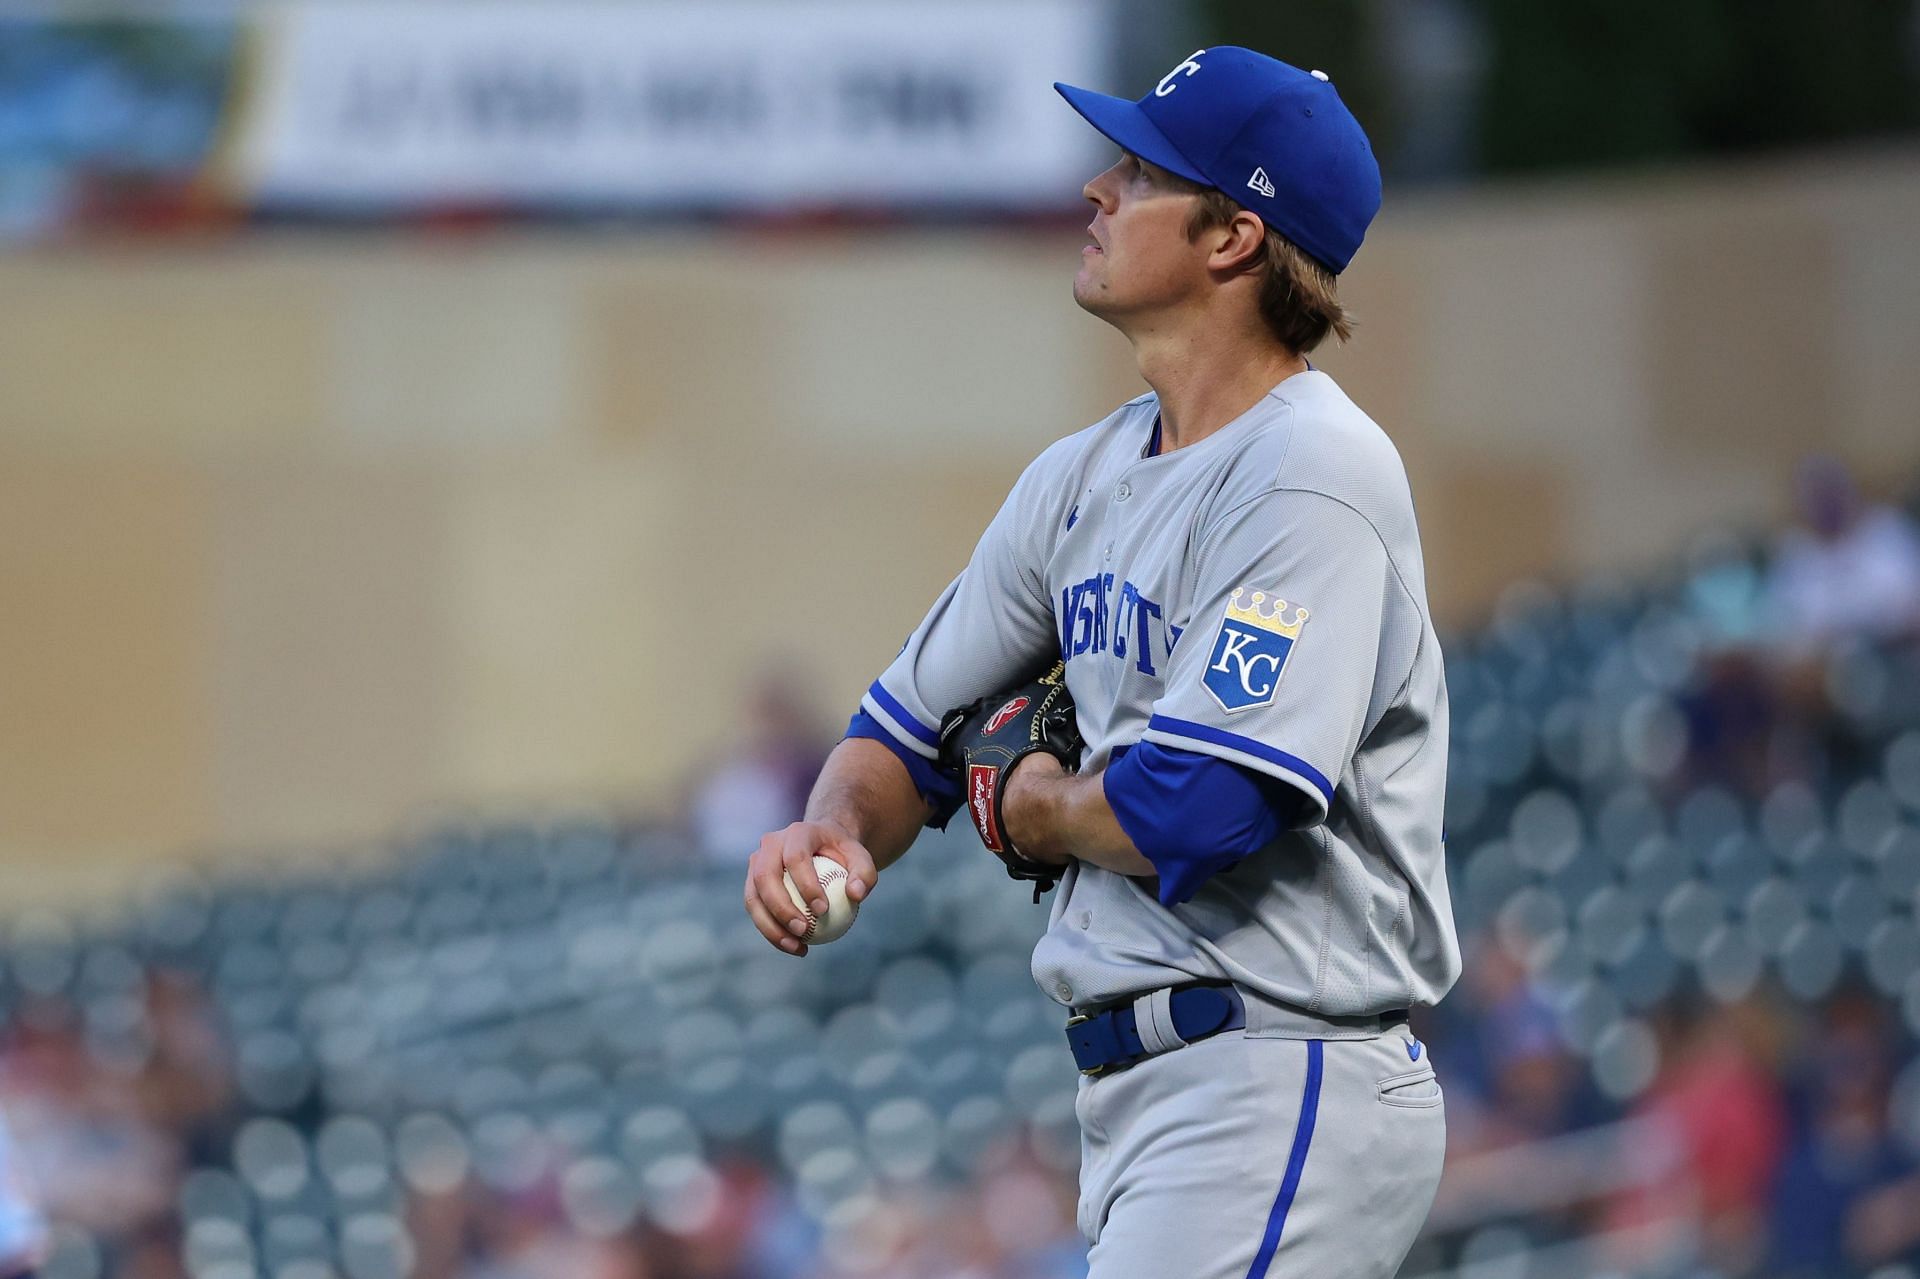 Greinke during the game between the Minnesota Twins and the Royals. The Twins defeated the Royals 4-0.